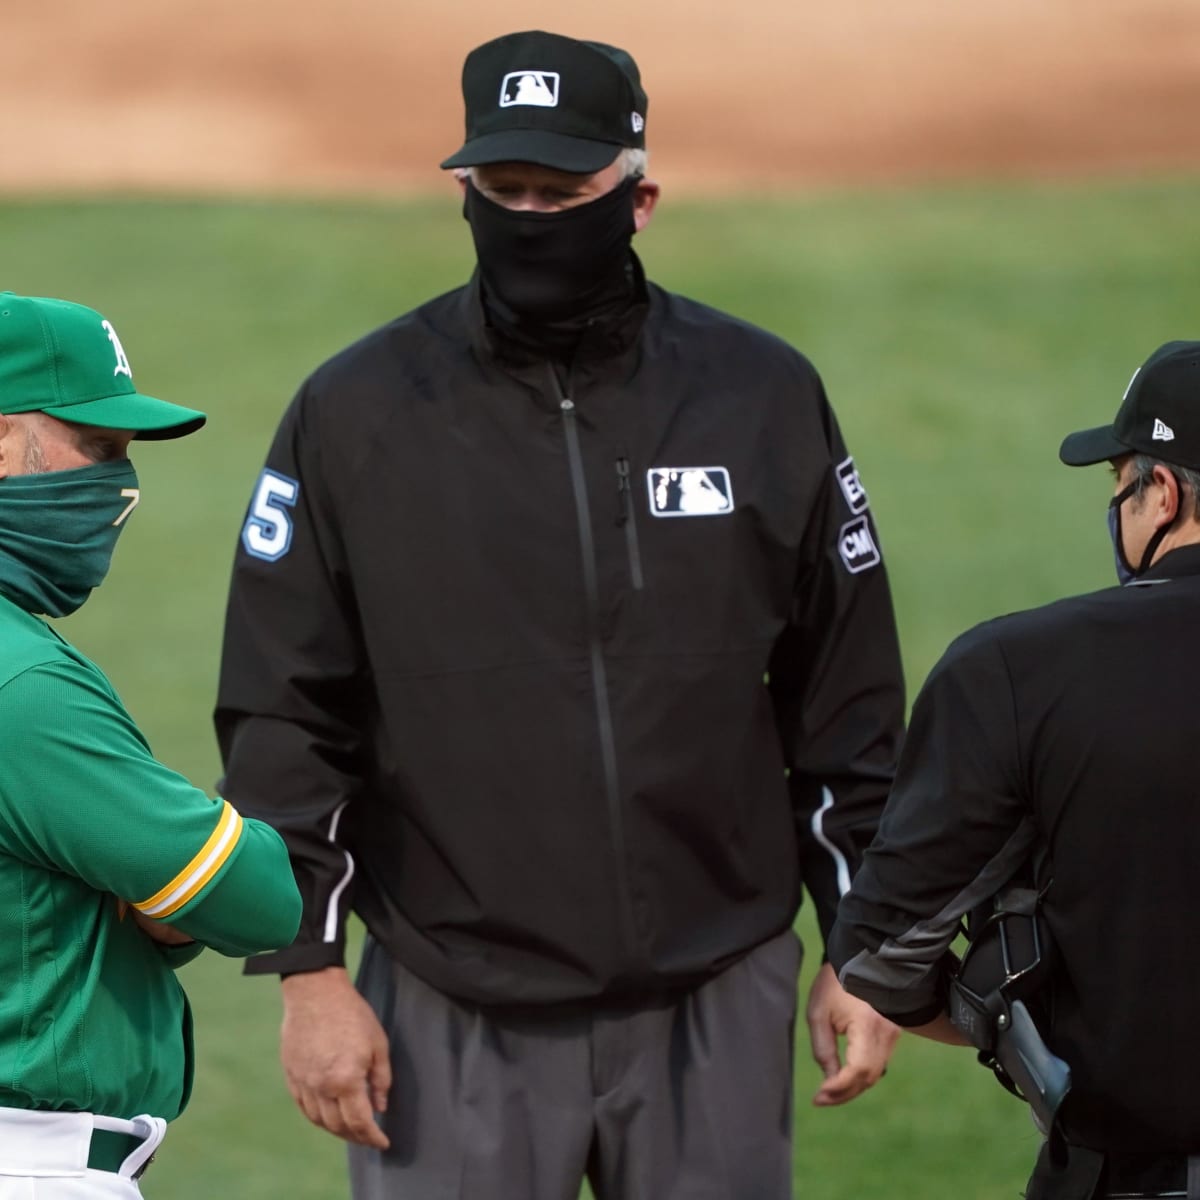 MLB umpire reportedly tests positive for COVID-19 - Sports Illustrated